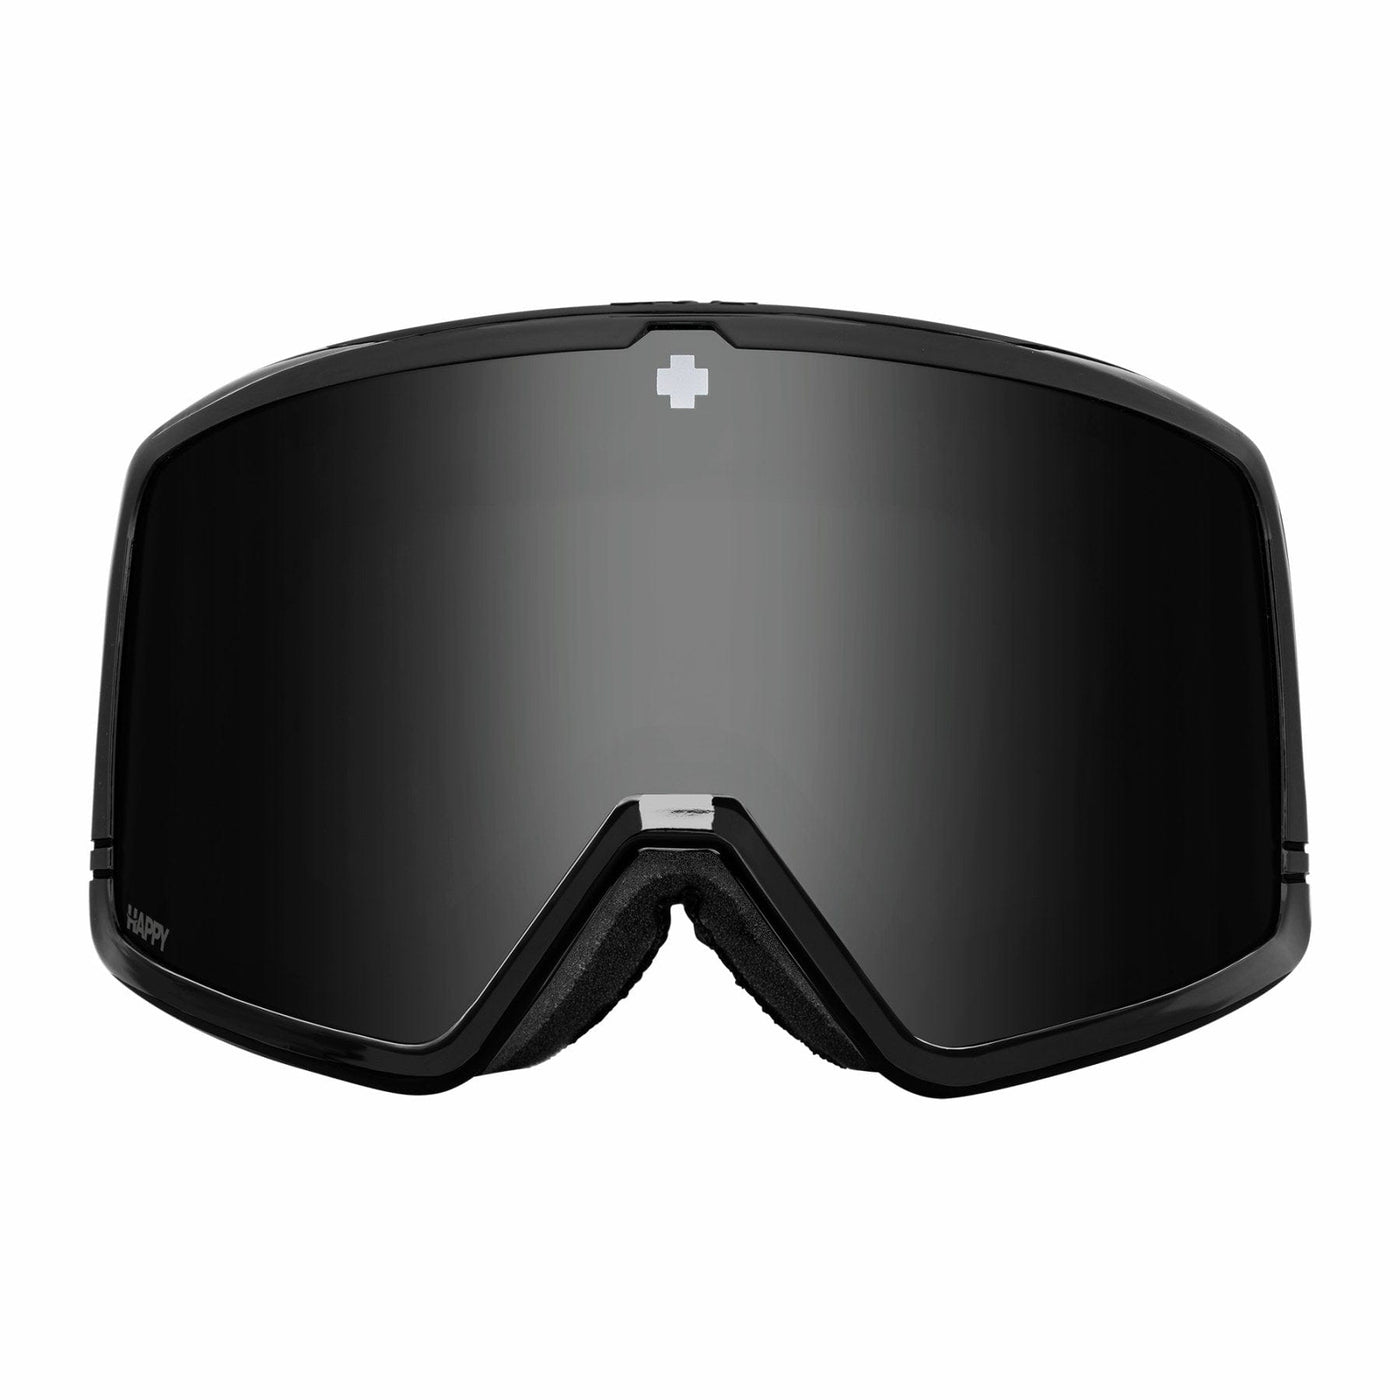 Replacement lens for snow goggles - black